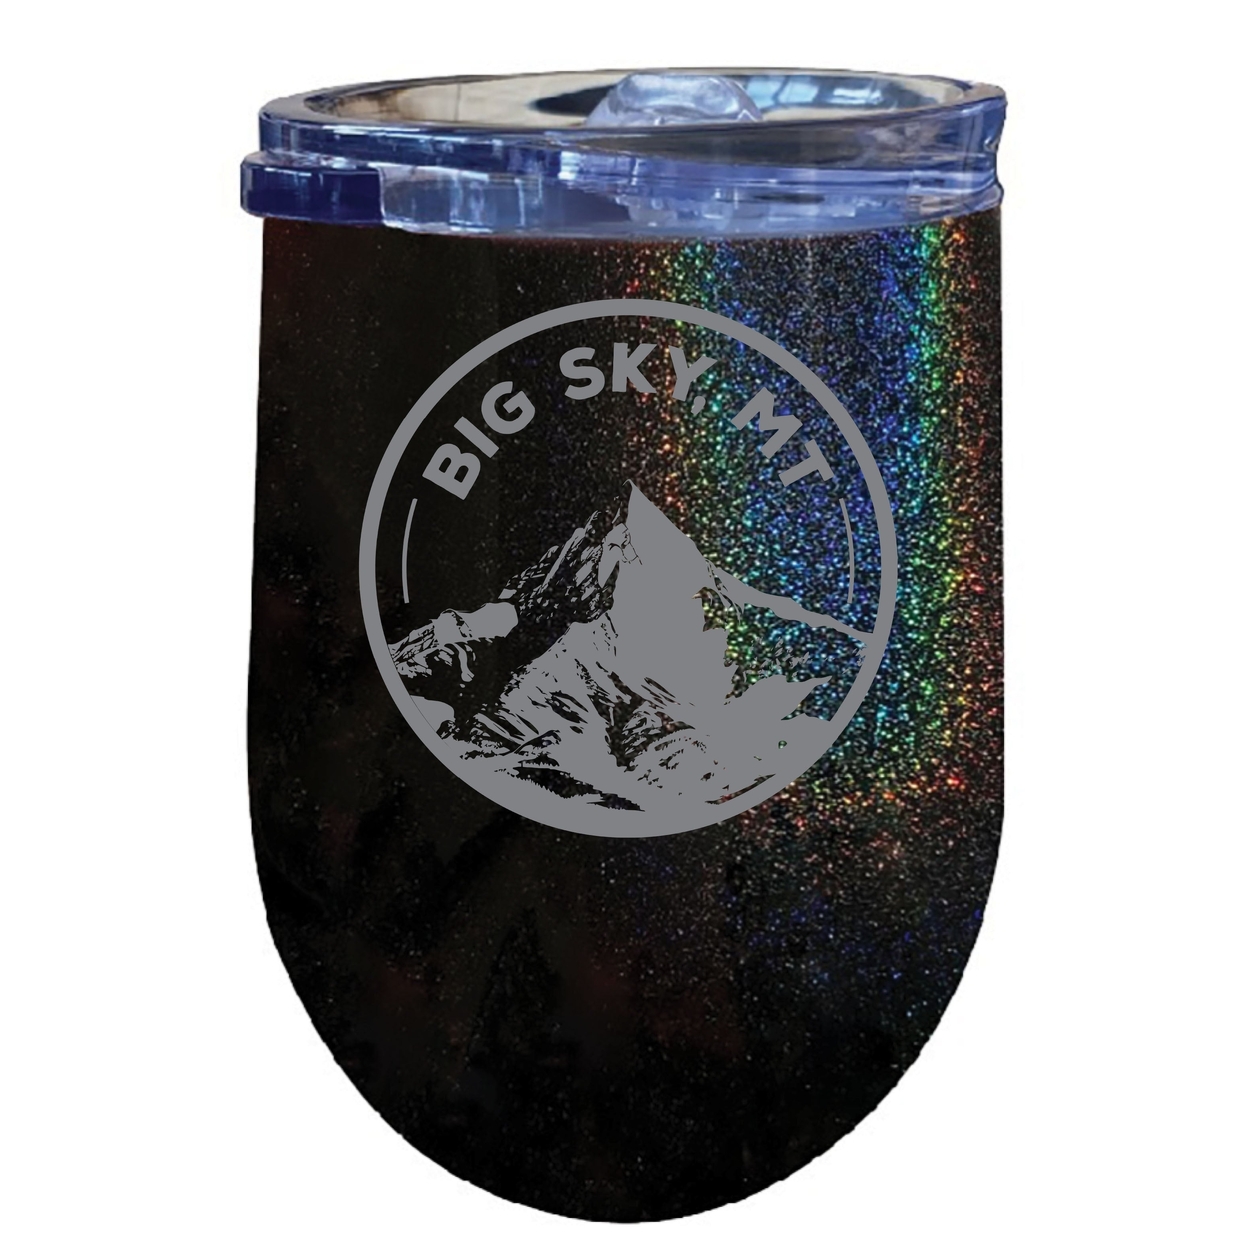 Big Sky Montana Souvenir 12 Oz Engraved Insulated Wine Stainless Steel Tumbler - Rose Gold,,2-Pack